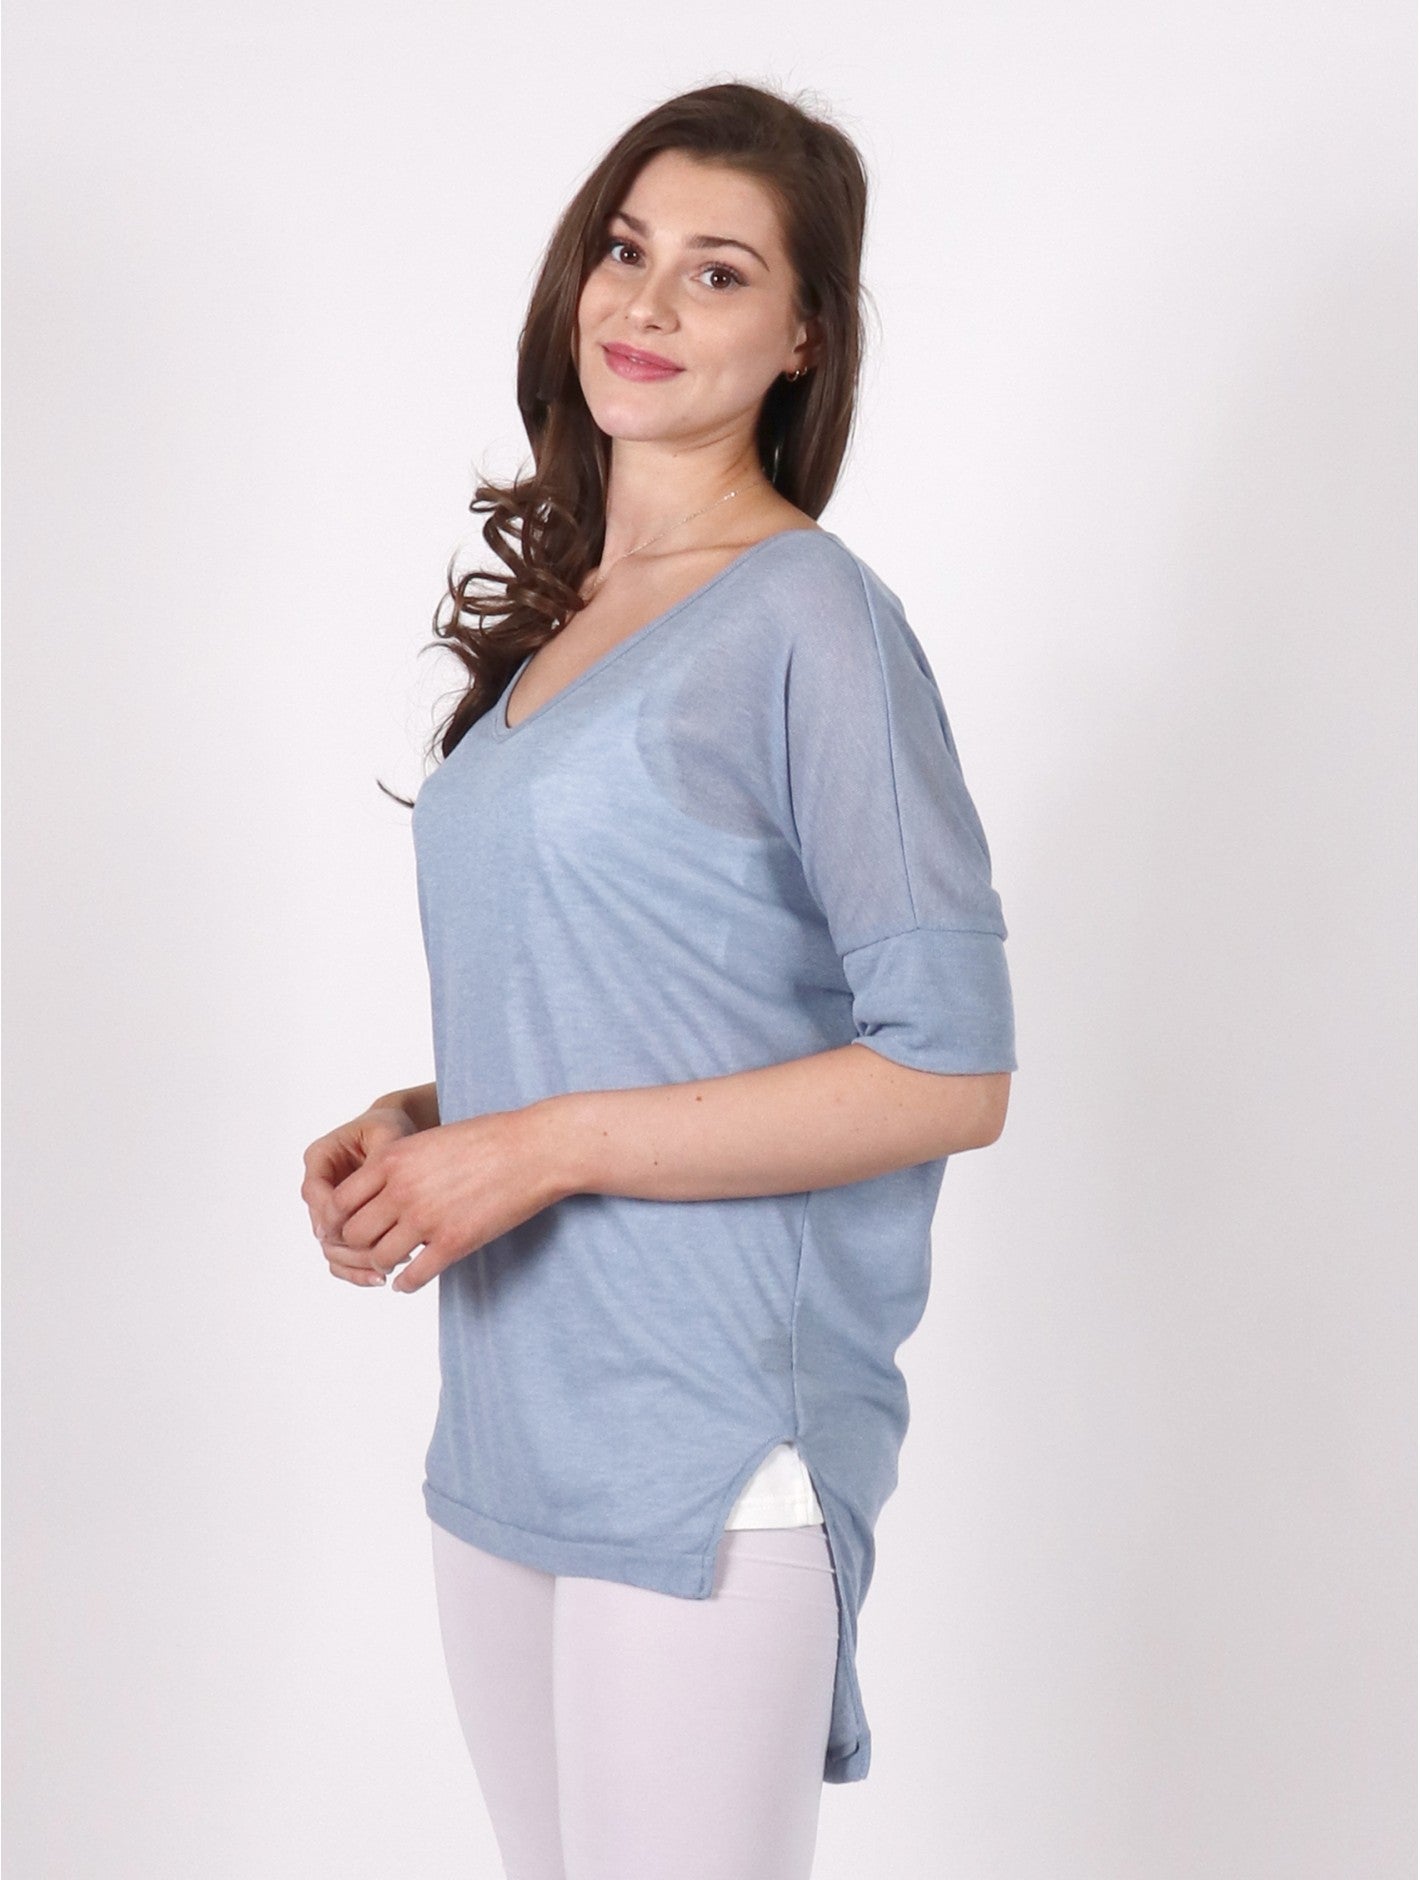 Light blue 1/2 length sleeve v-neck top.   The back of the top is longer than the front.